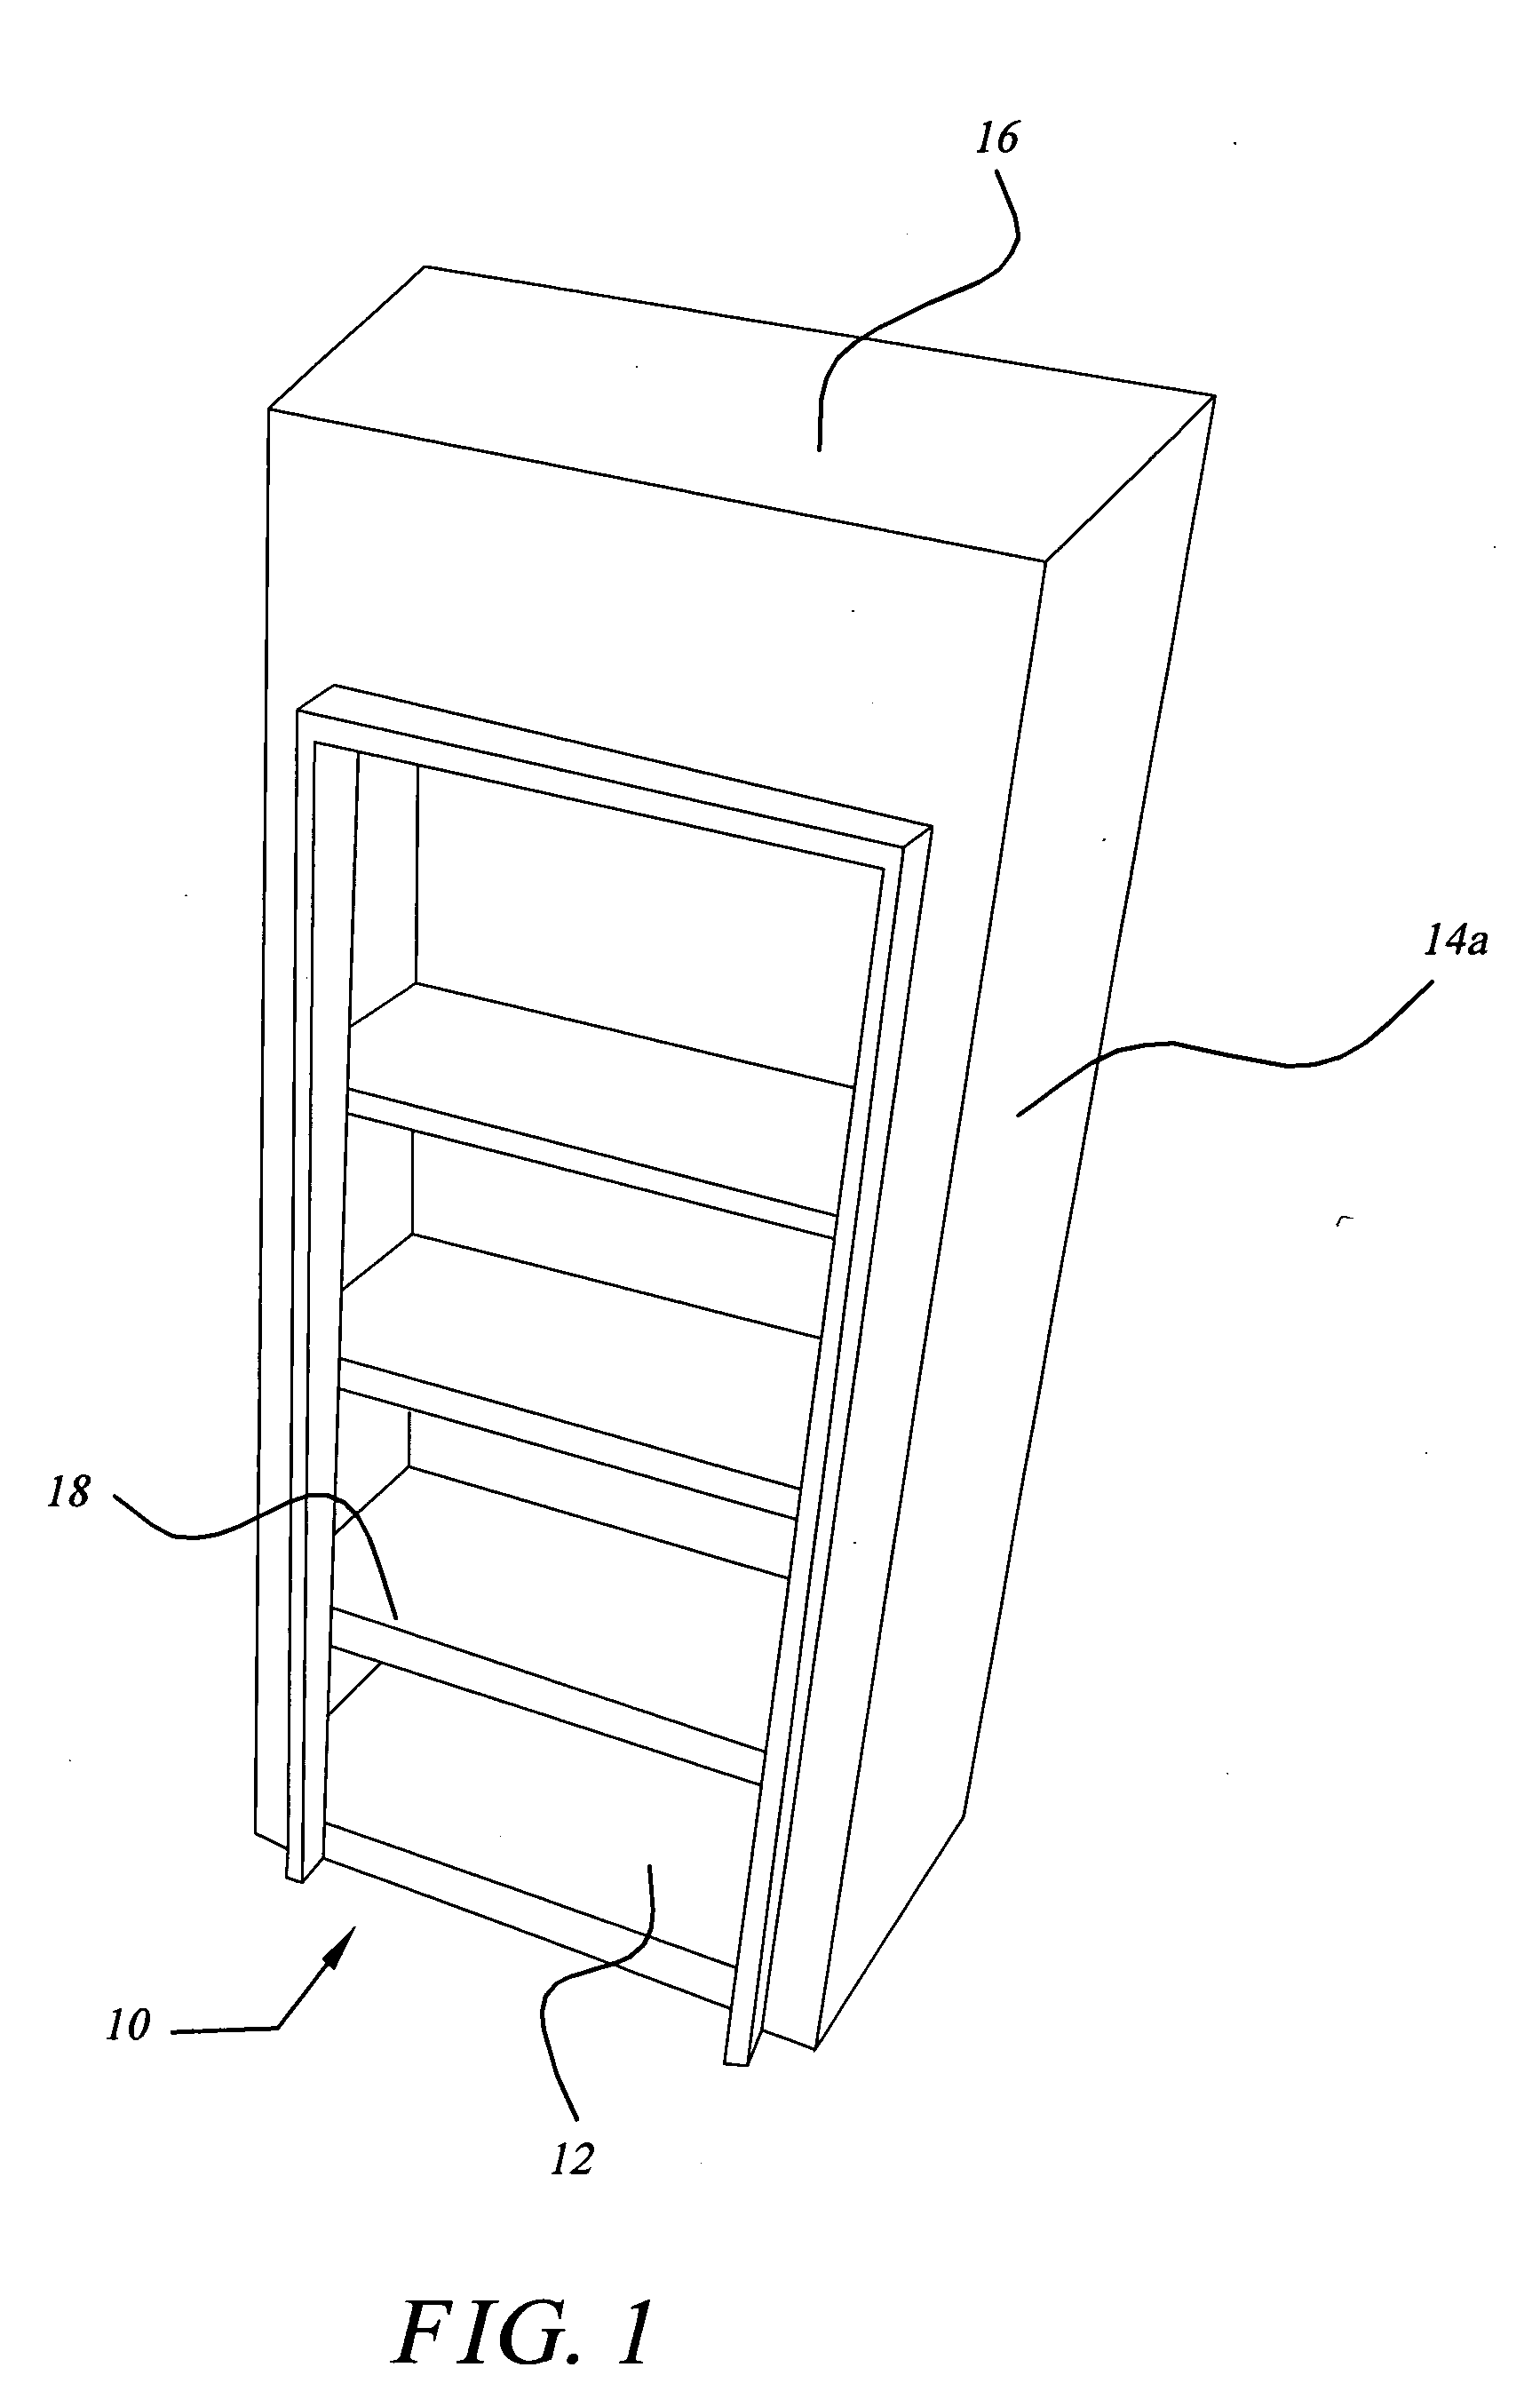 Method, system and article of manufacture for a modular room